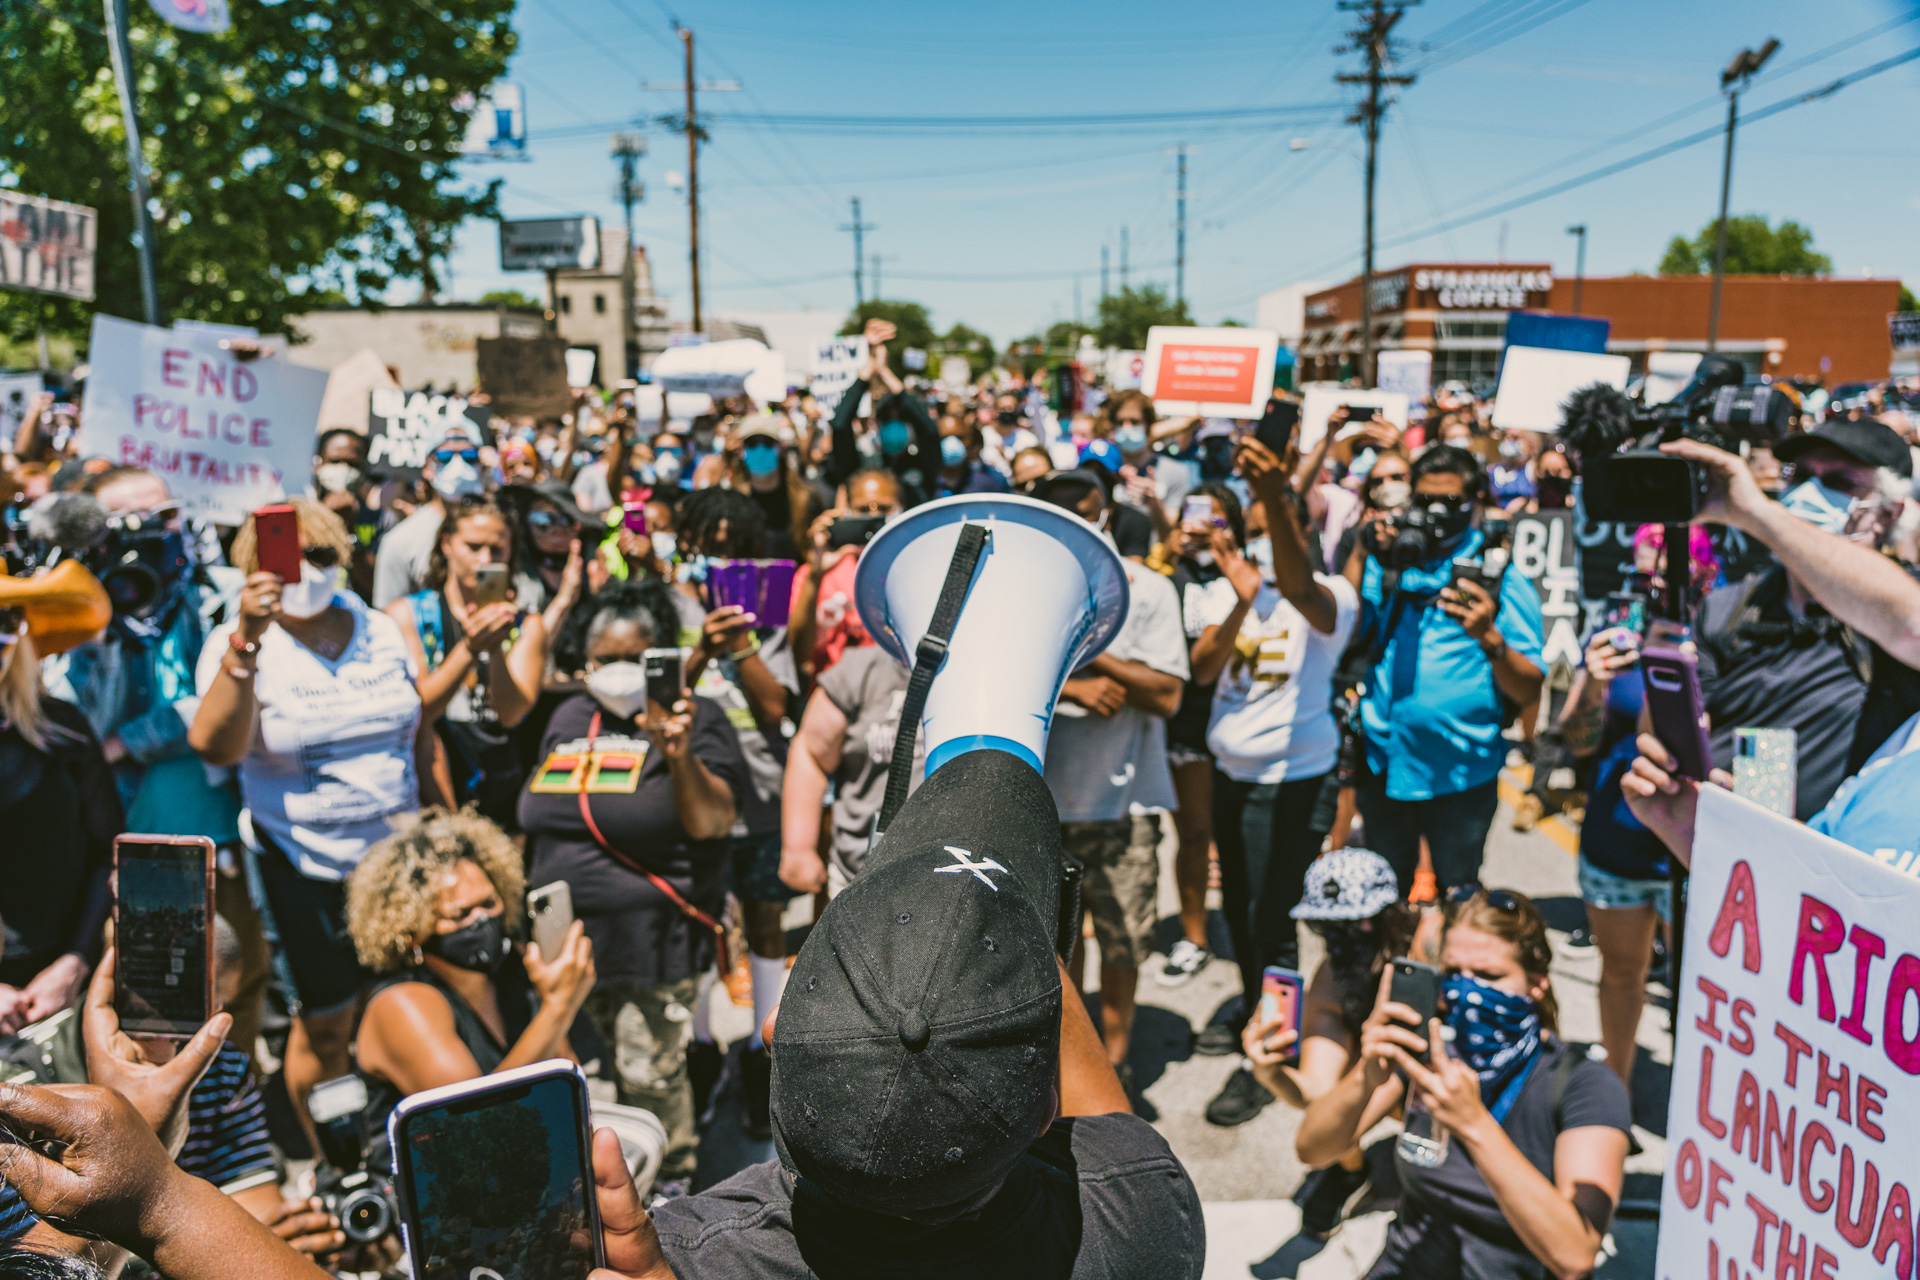 Tulsa activist Greg Robinson leads a protest in downtown Tulsa to protest racial in justice and police brutality in the wake of George Floyd's death. (CreeseWorks—The Black Wall Street Times)